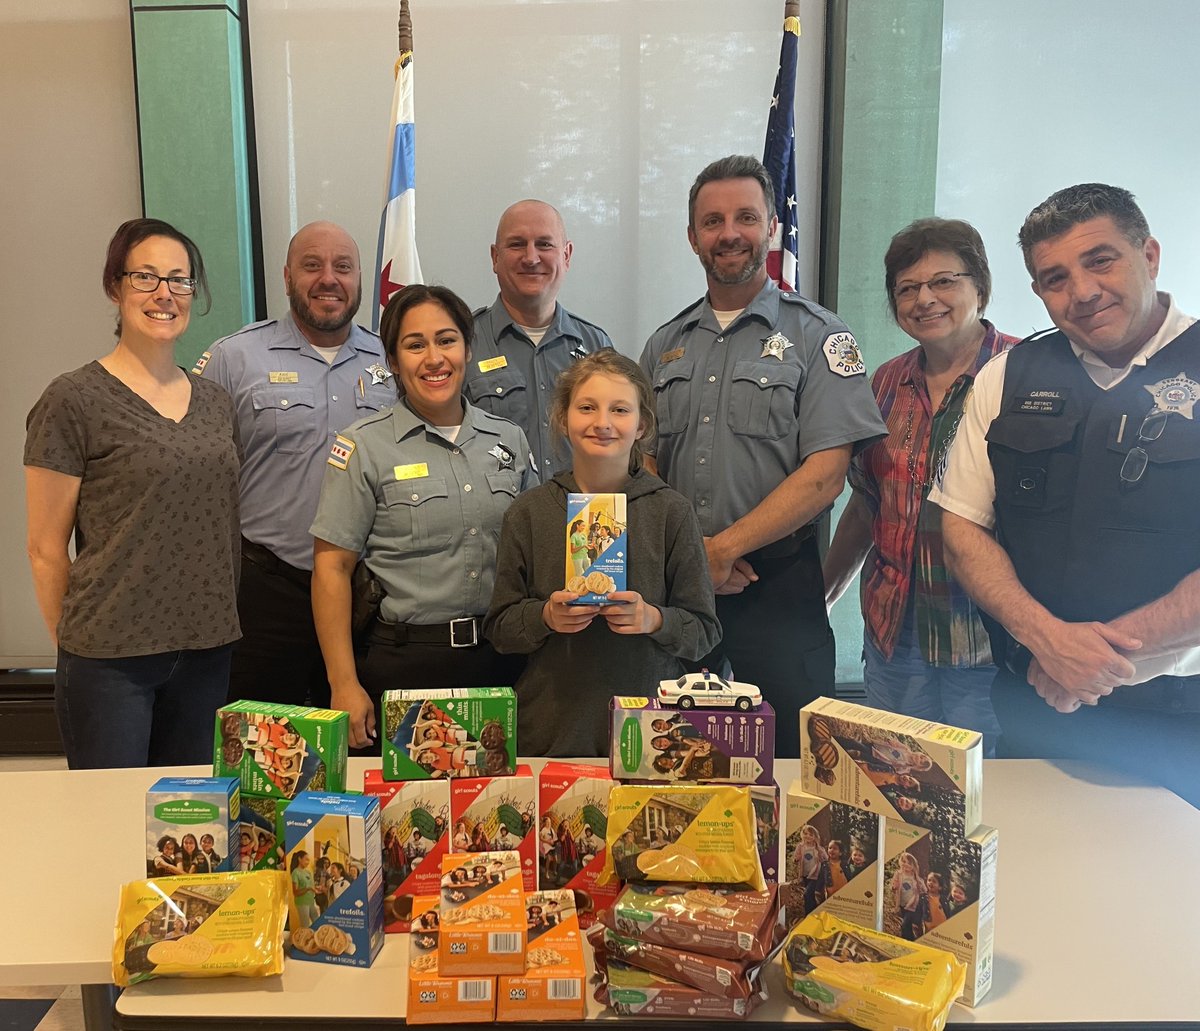 Officers were able to enjoy some tasty Girl Scout Cookies thanks to Troop 45992!